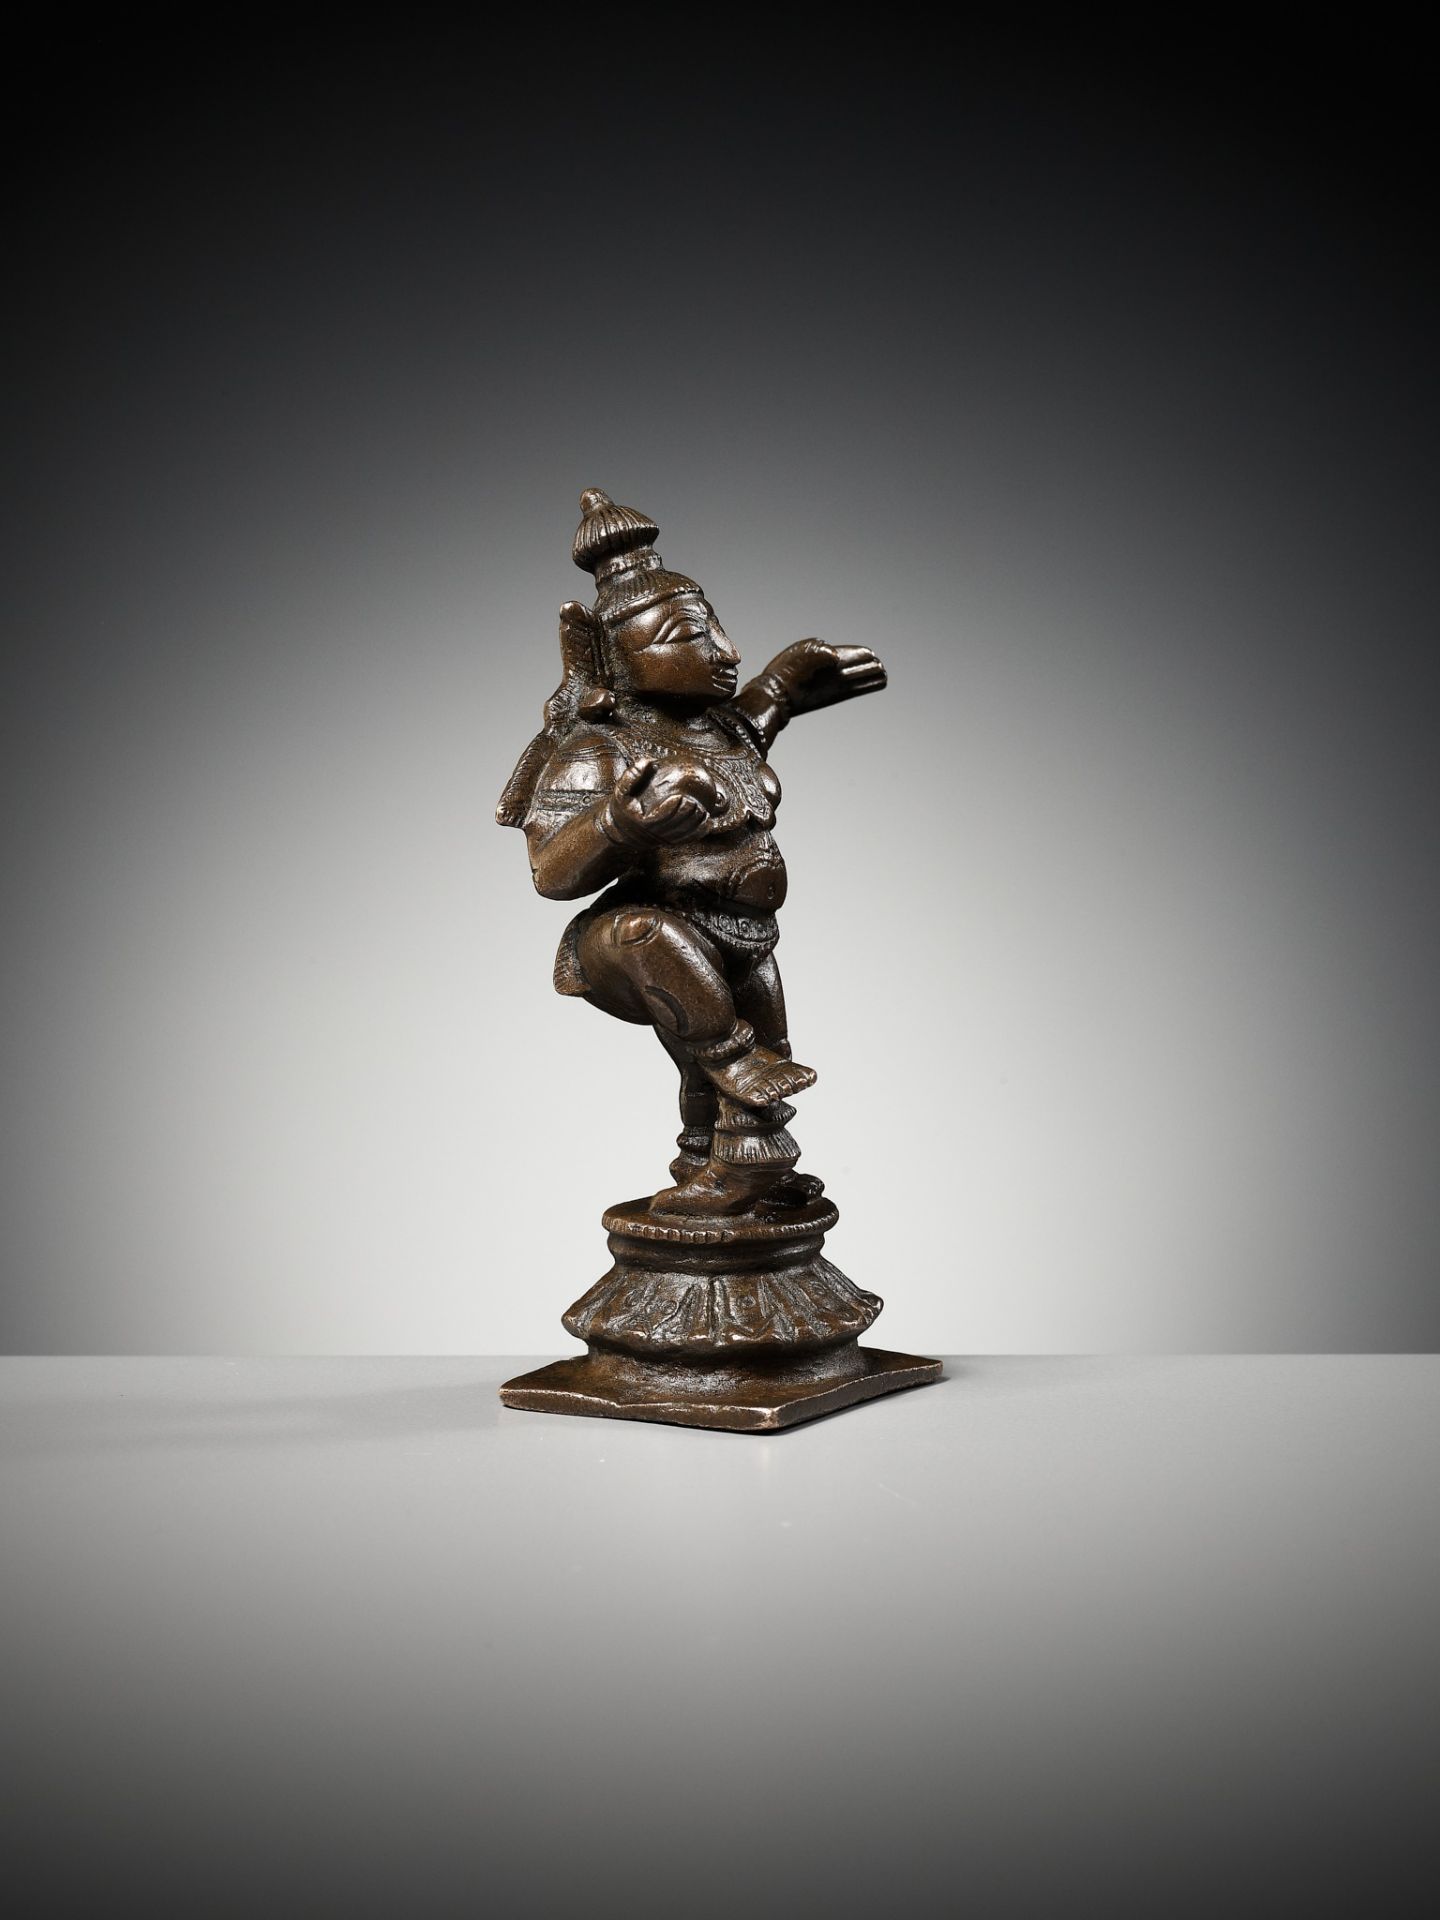 A COPPER ALLOY FIGURE OF DANCING KRISHNA, SOUTH INDIA, 17TH-18TH CENTURY - Image 9 of 13